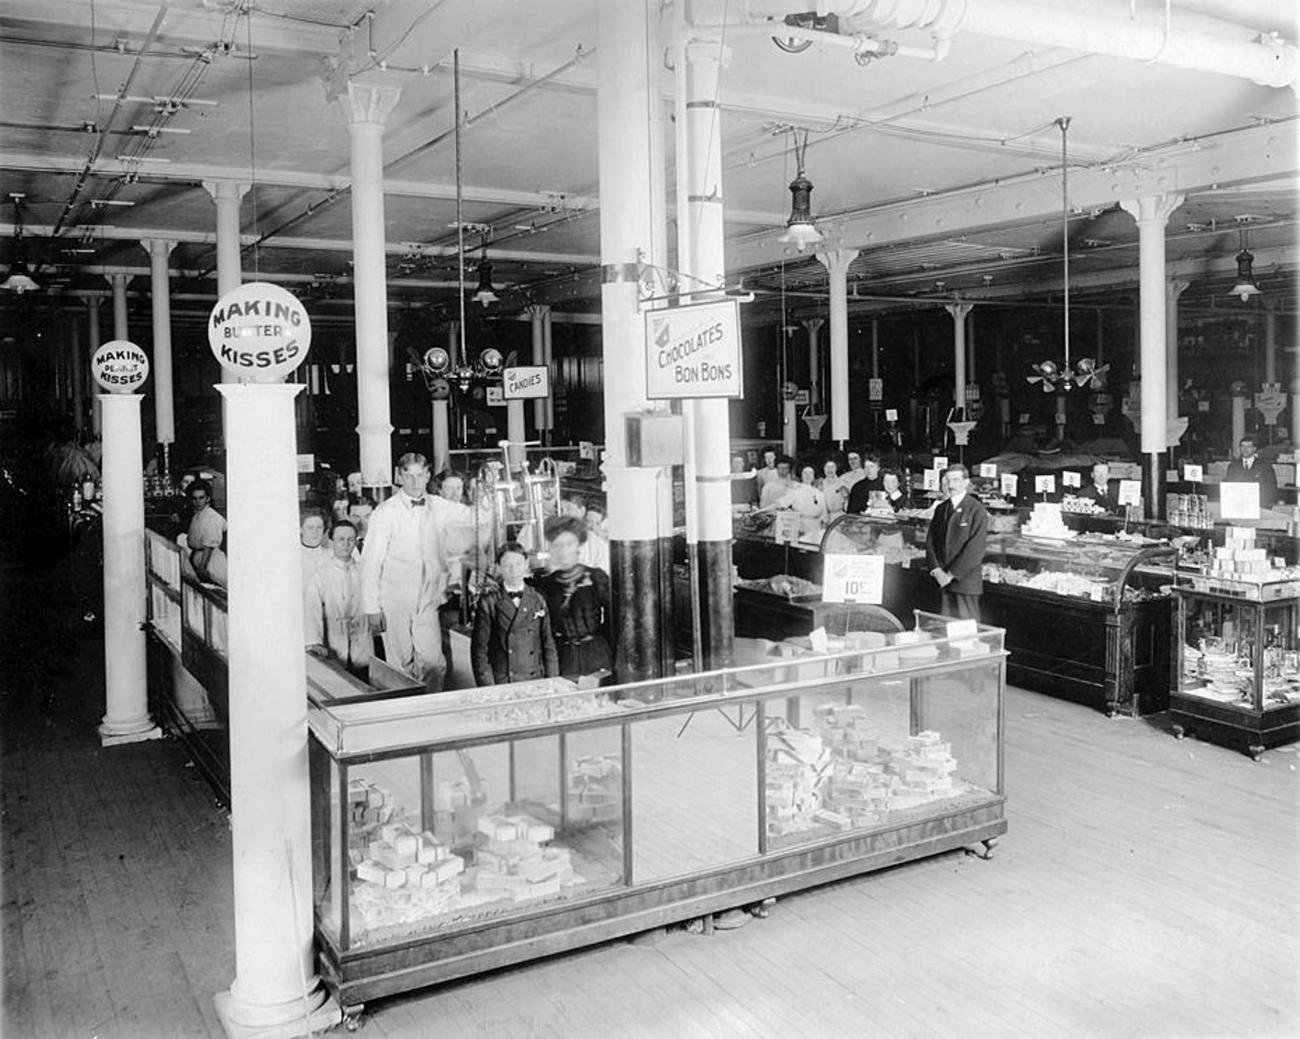 a shop counter with many staff standing behind it and in the background.